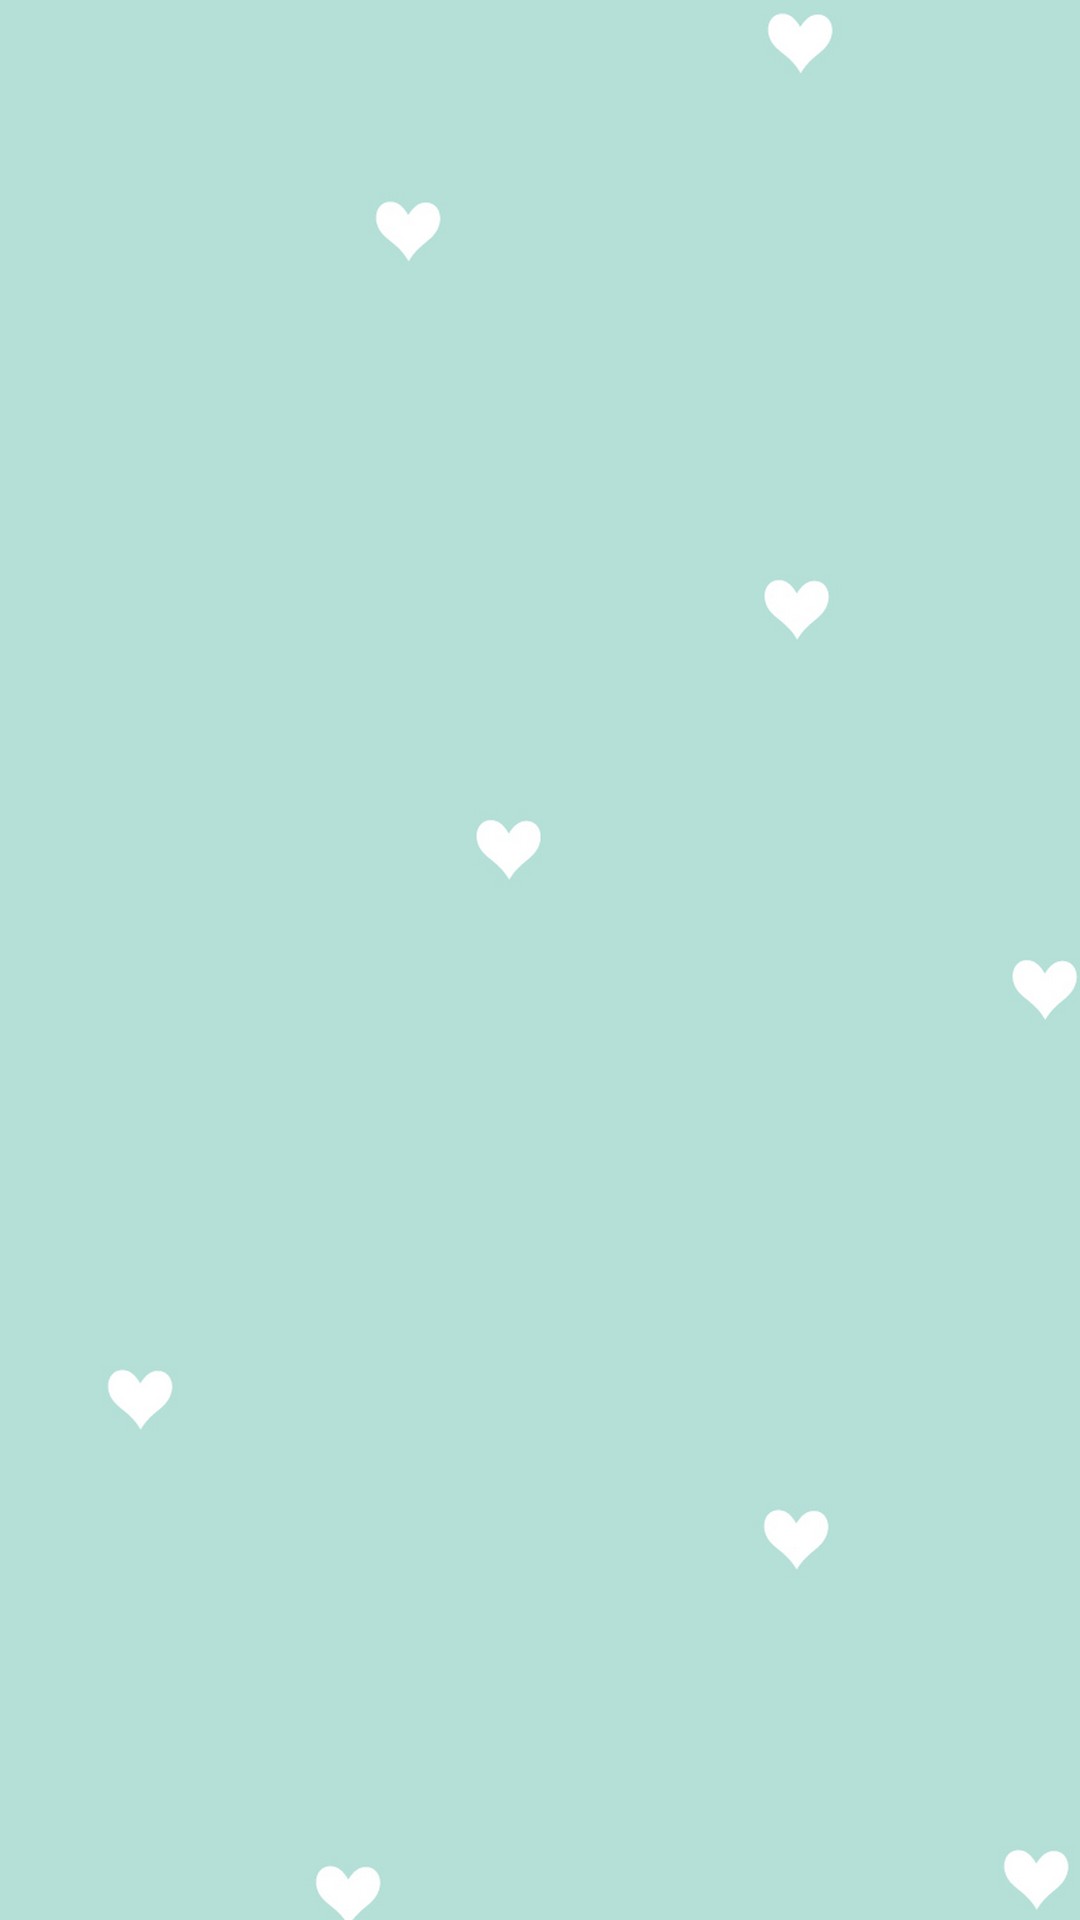 Mint Green HD Wallpapers For Android with resolution 1080X1920 pixel. You can make this wallpaper for your Android backgrounds, Tablet, Smartphones Screensavers and Mobile Phone Lock Screen